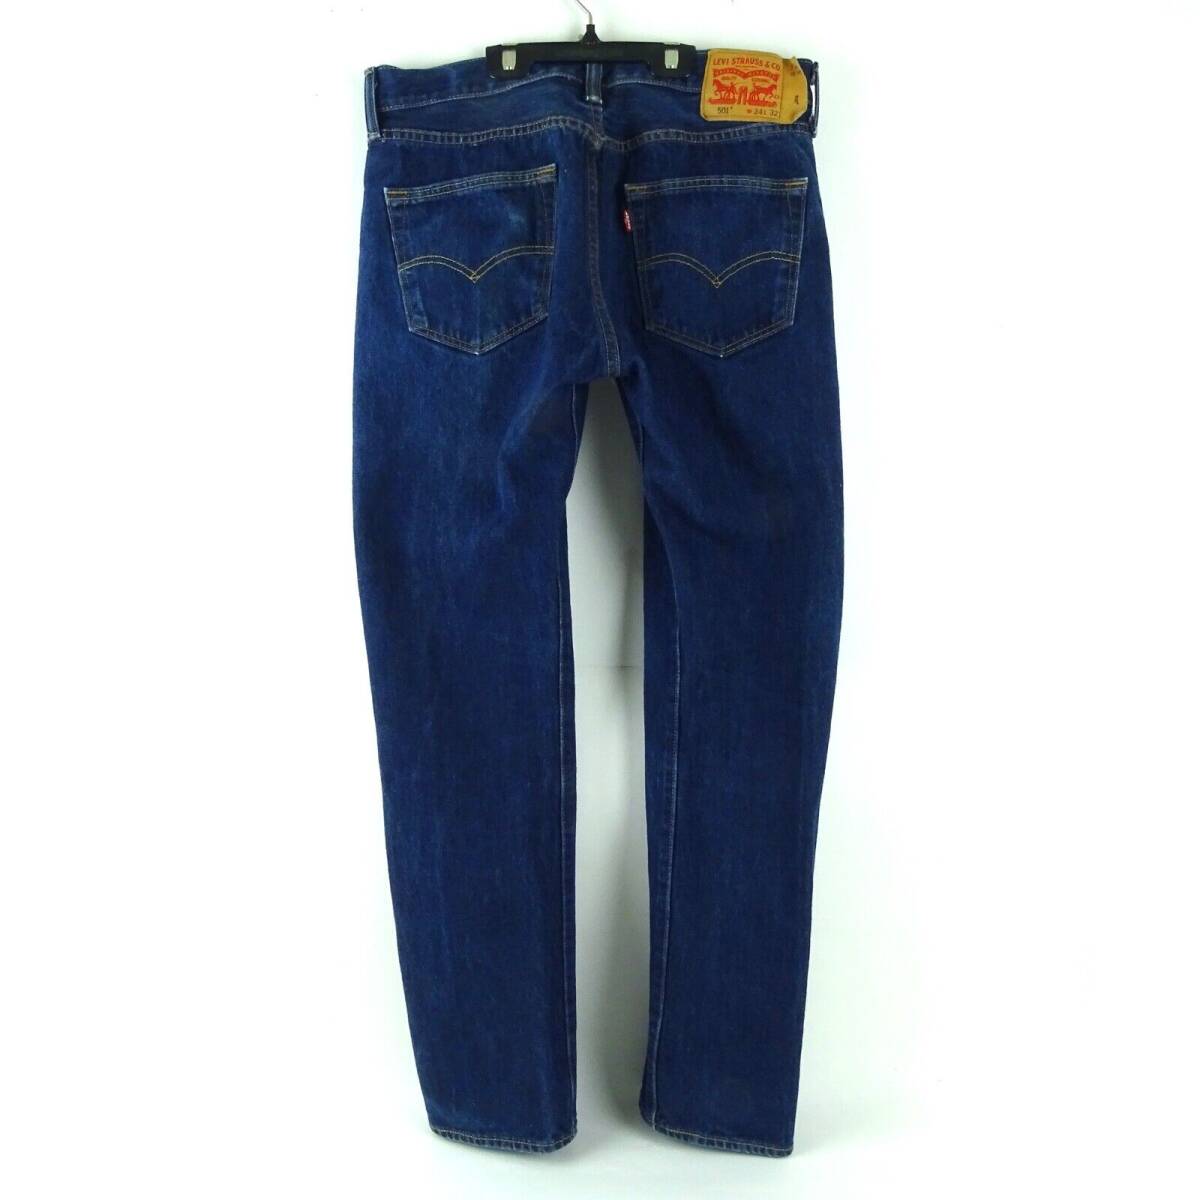 Levis 501 Straight Leg Button Fly All Cotton Jeans Mens W34 x L31.5 Measured 海外 即決_Levis 501 Straight 5